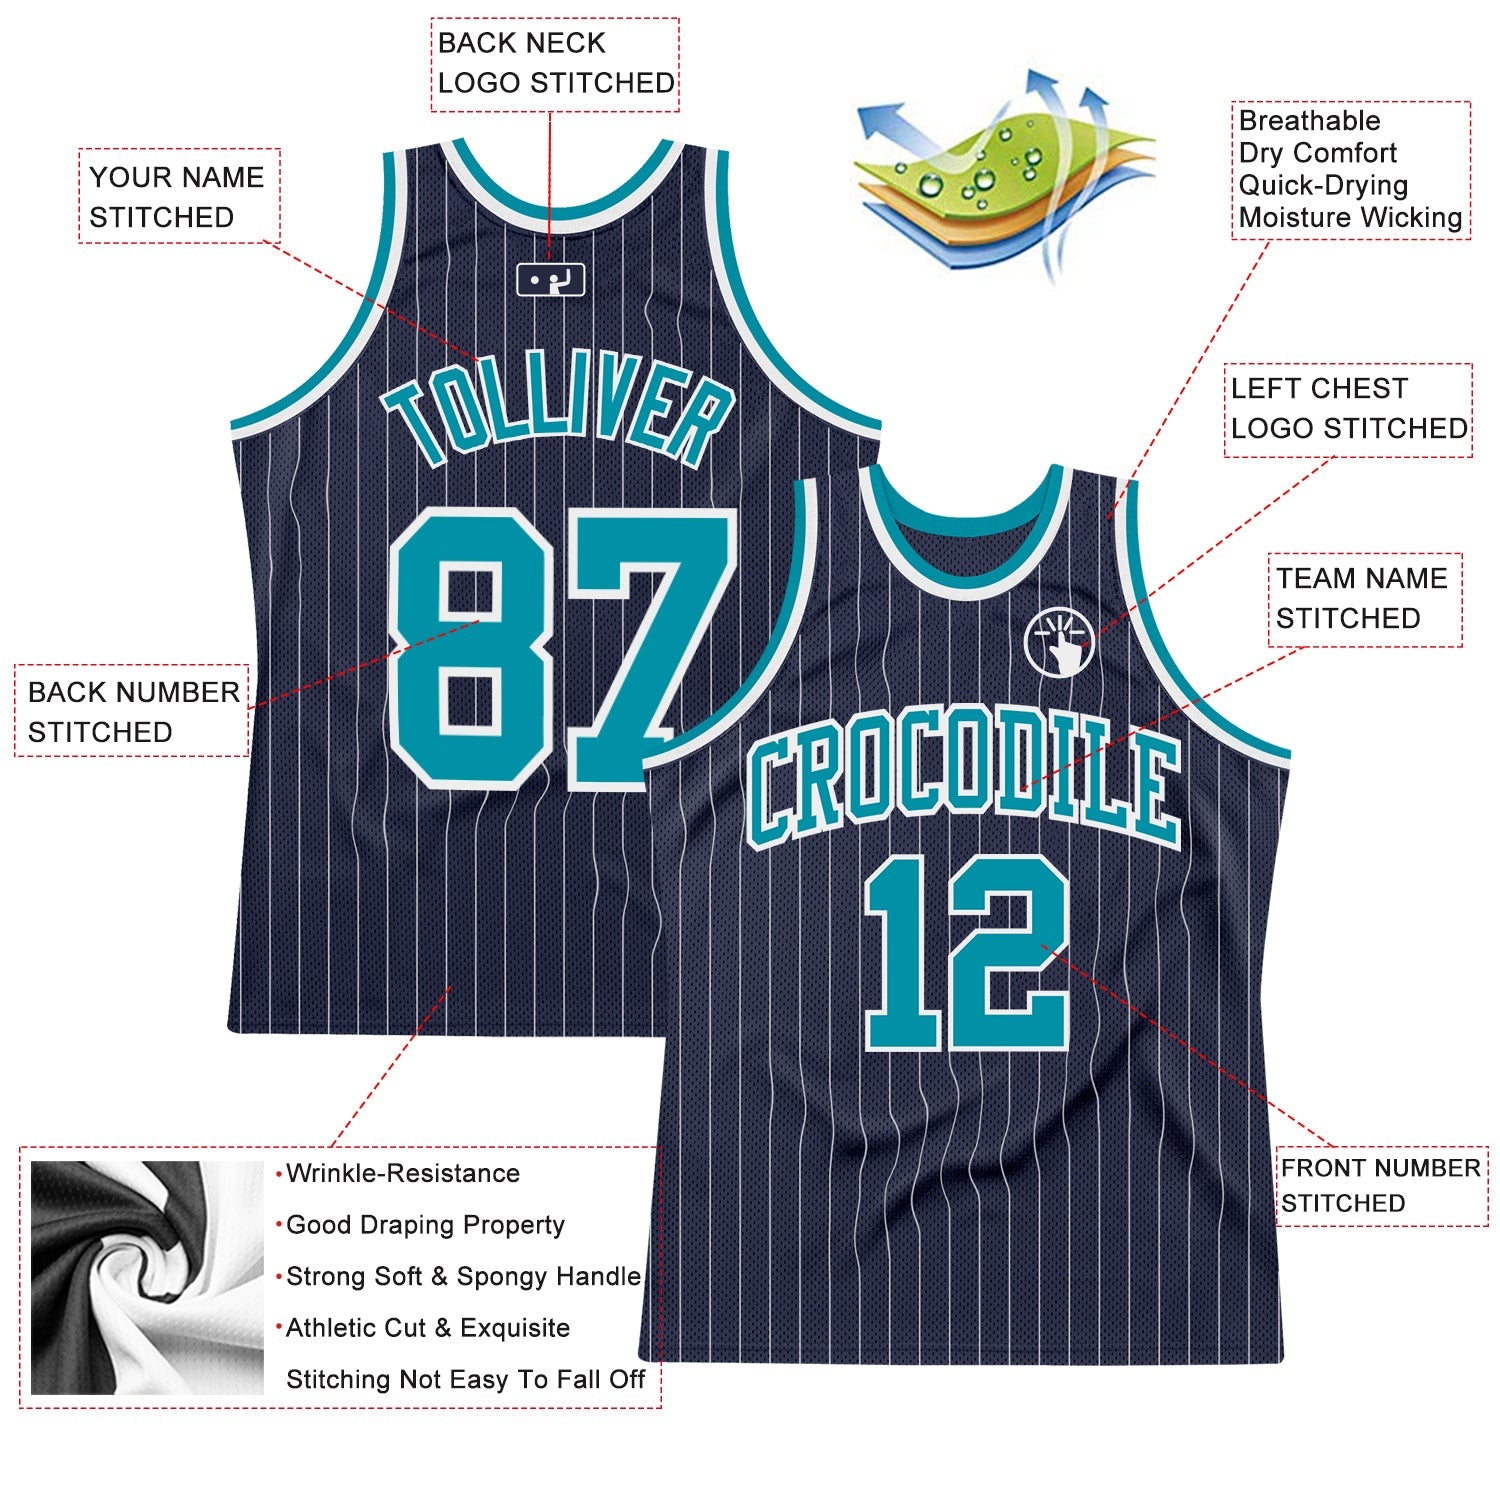 Custom Navy White Pinstripe Teal Authentic Basketball Jersey